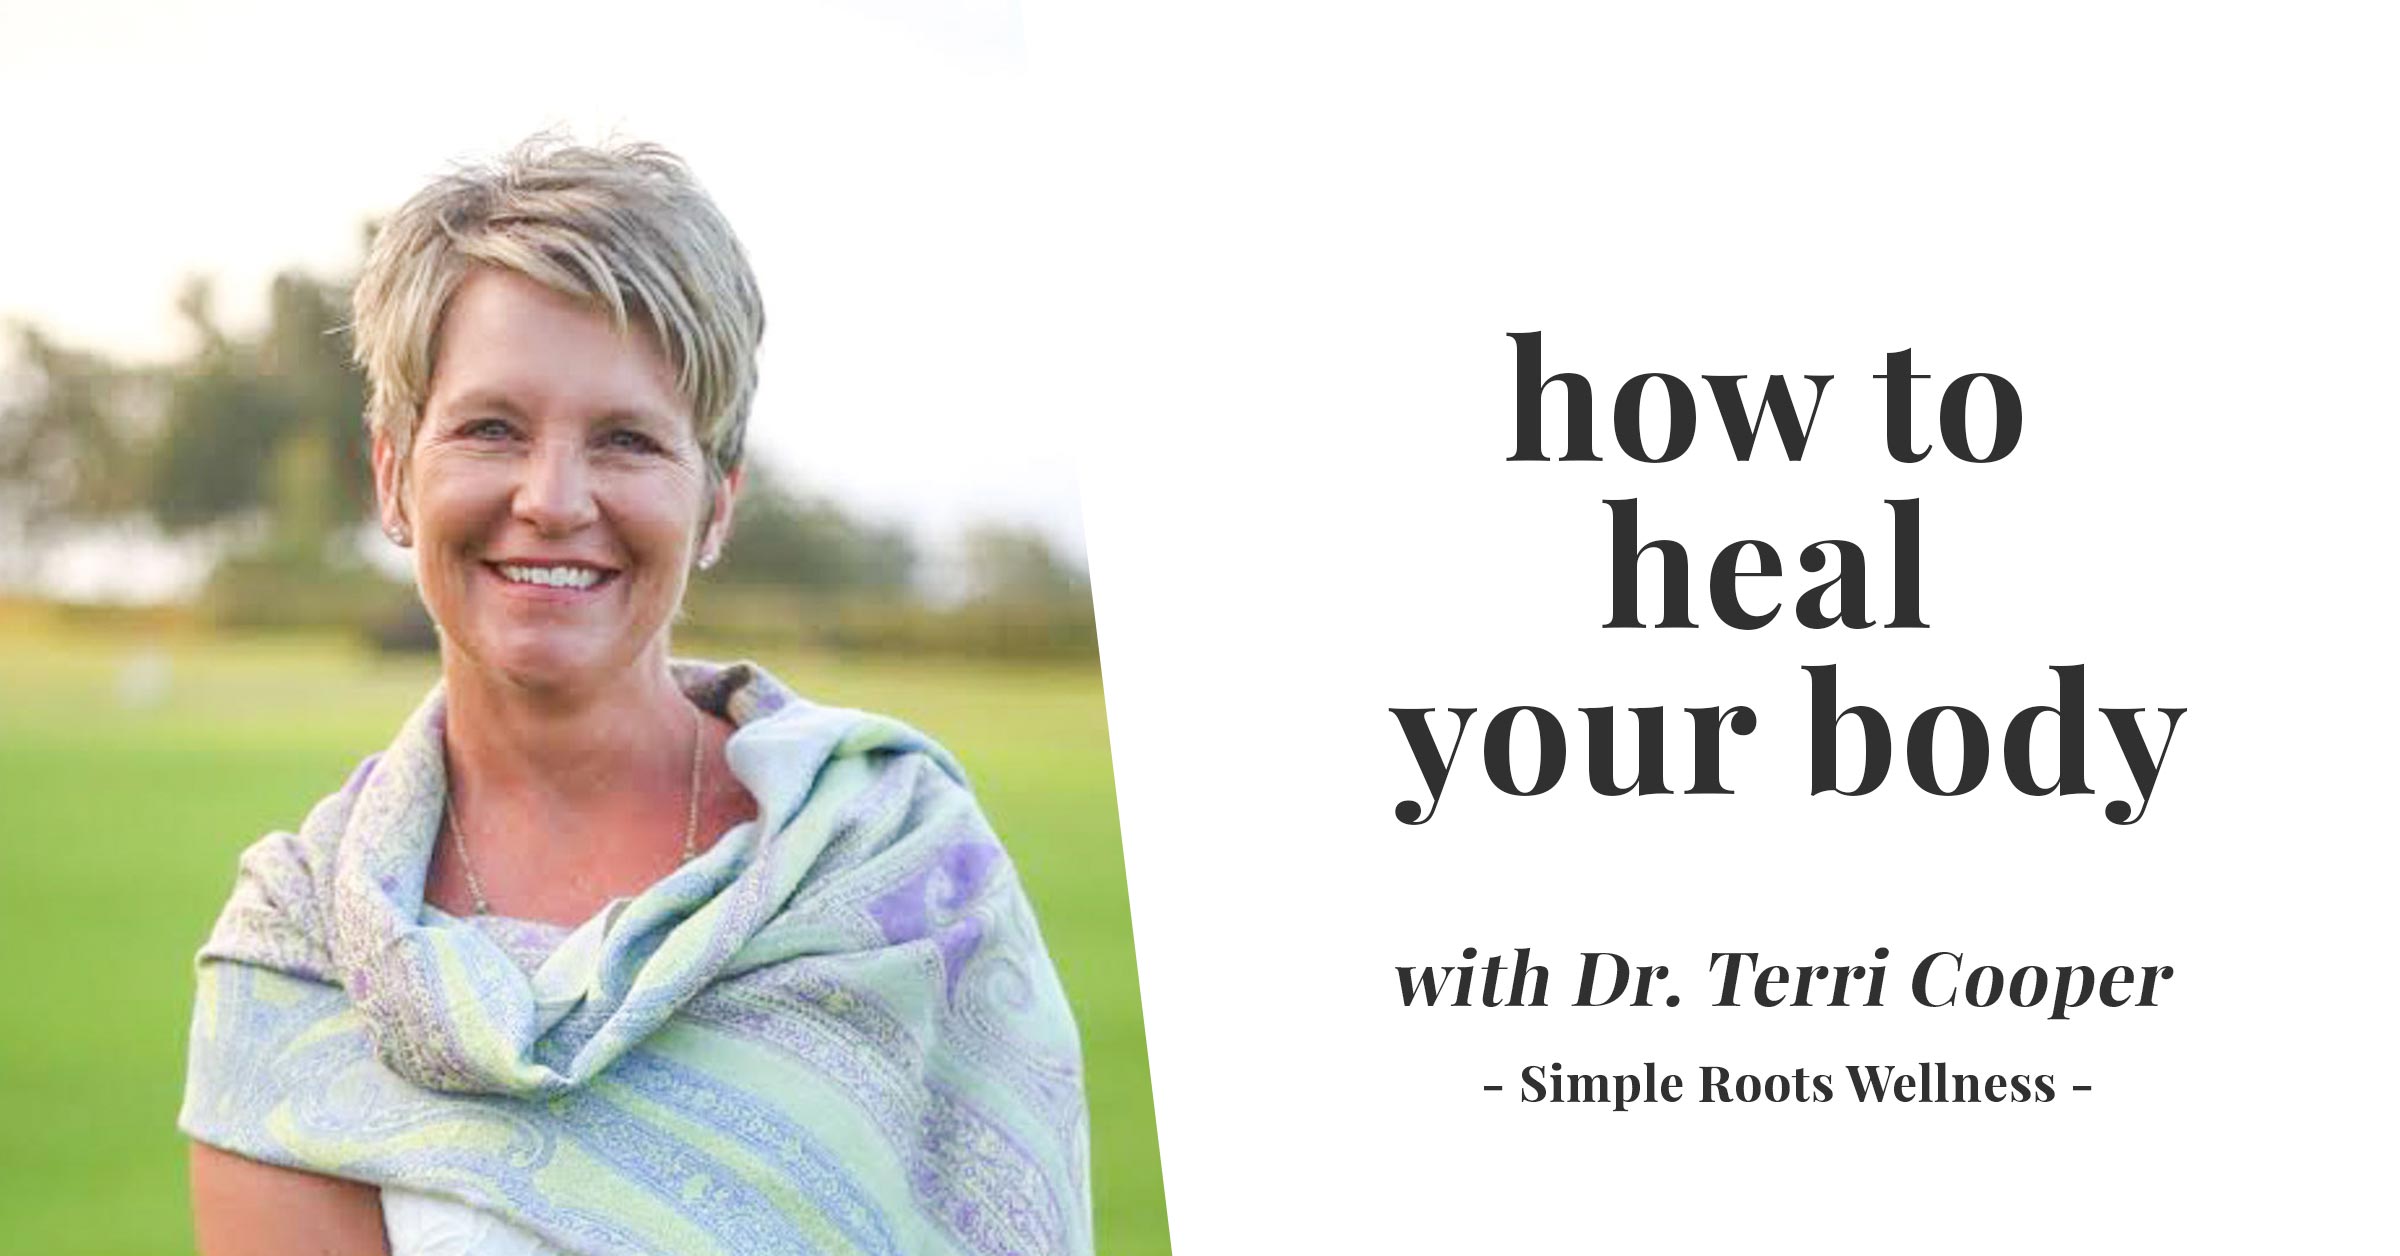 The one thing you need to know to heal your body and get your health back.